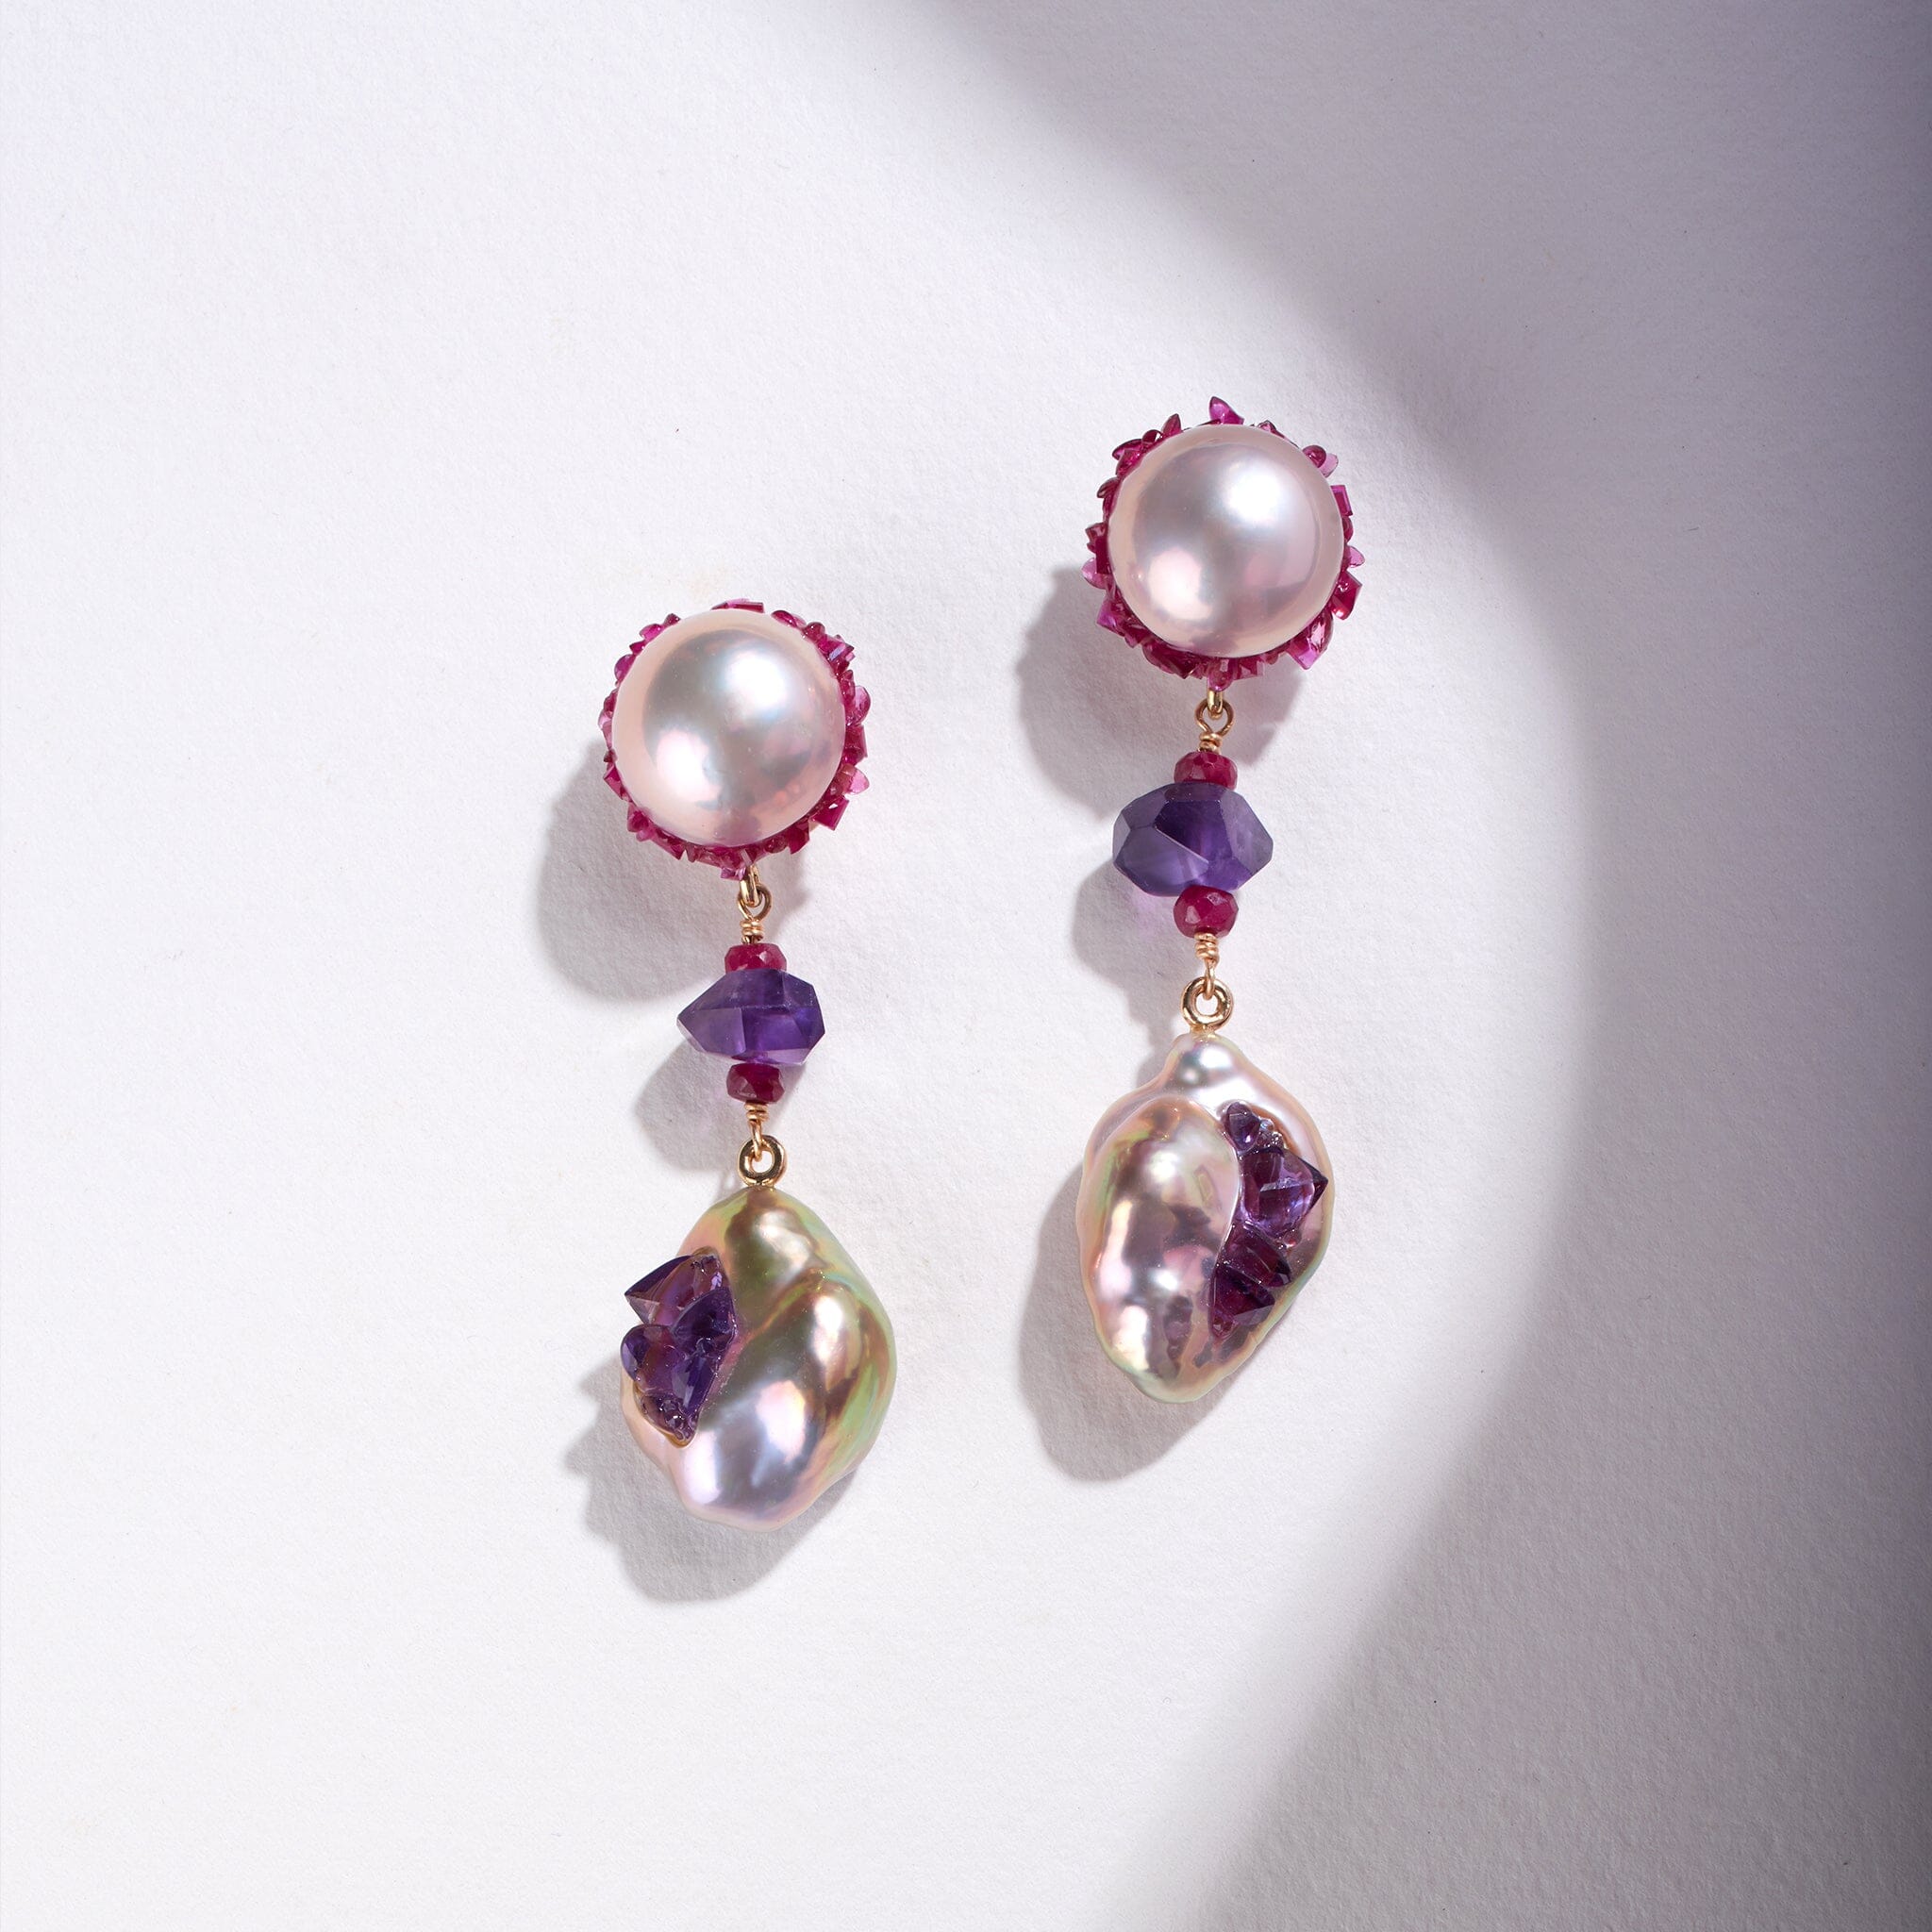 Freshwater Edison and Souffle Pearl Spiral Statement Earrings with Ruby and Amethyst